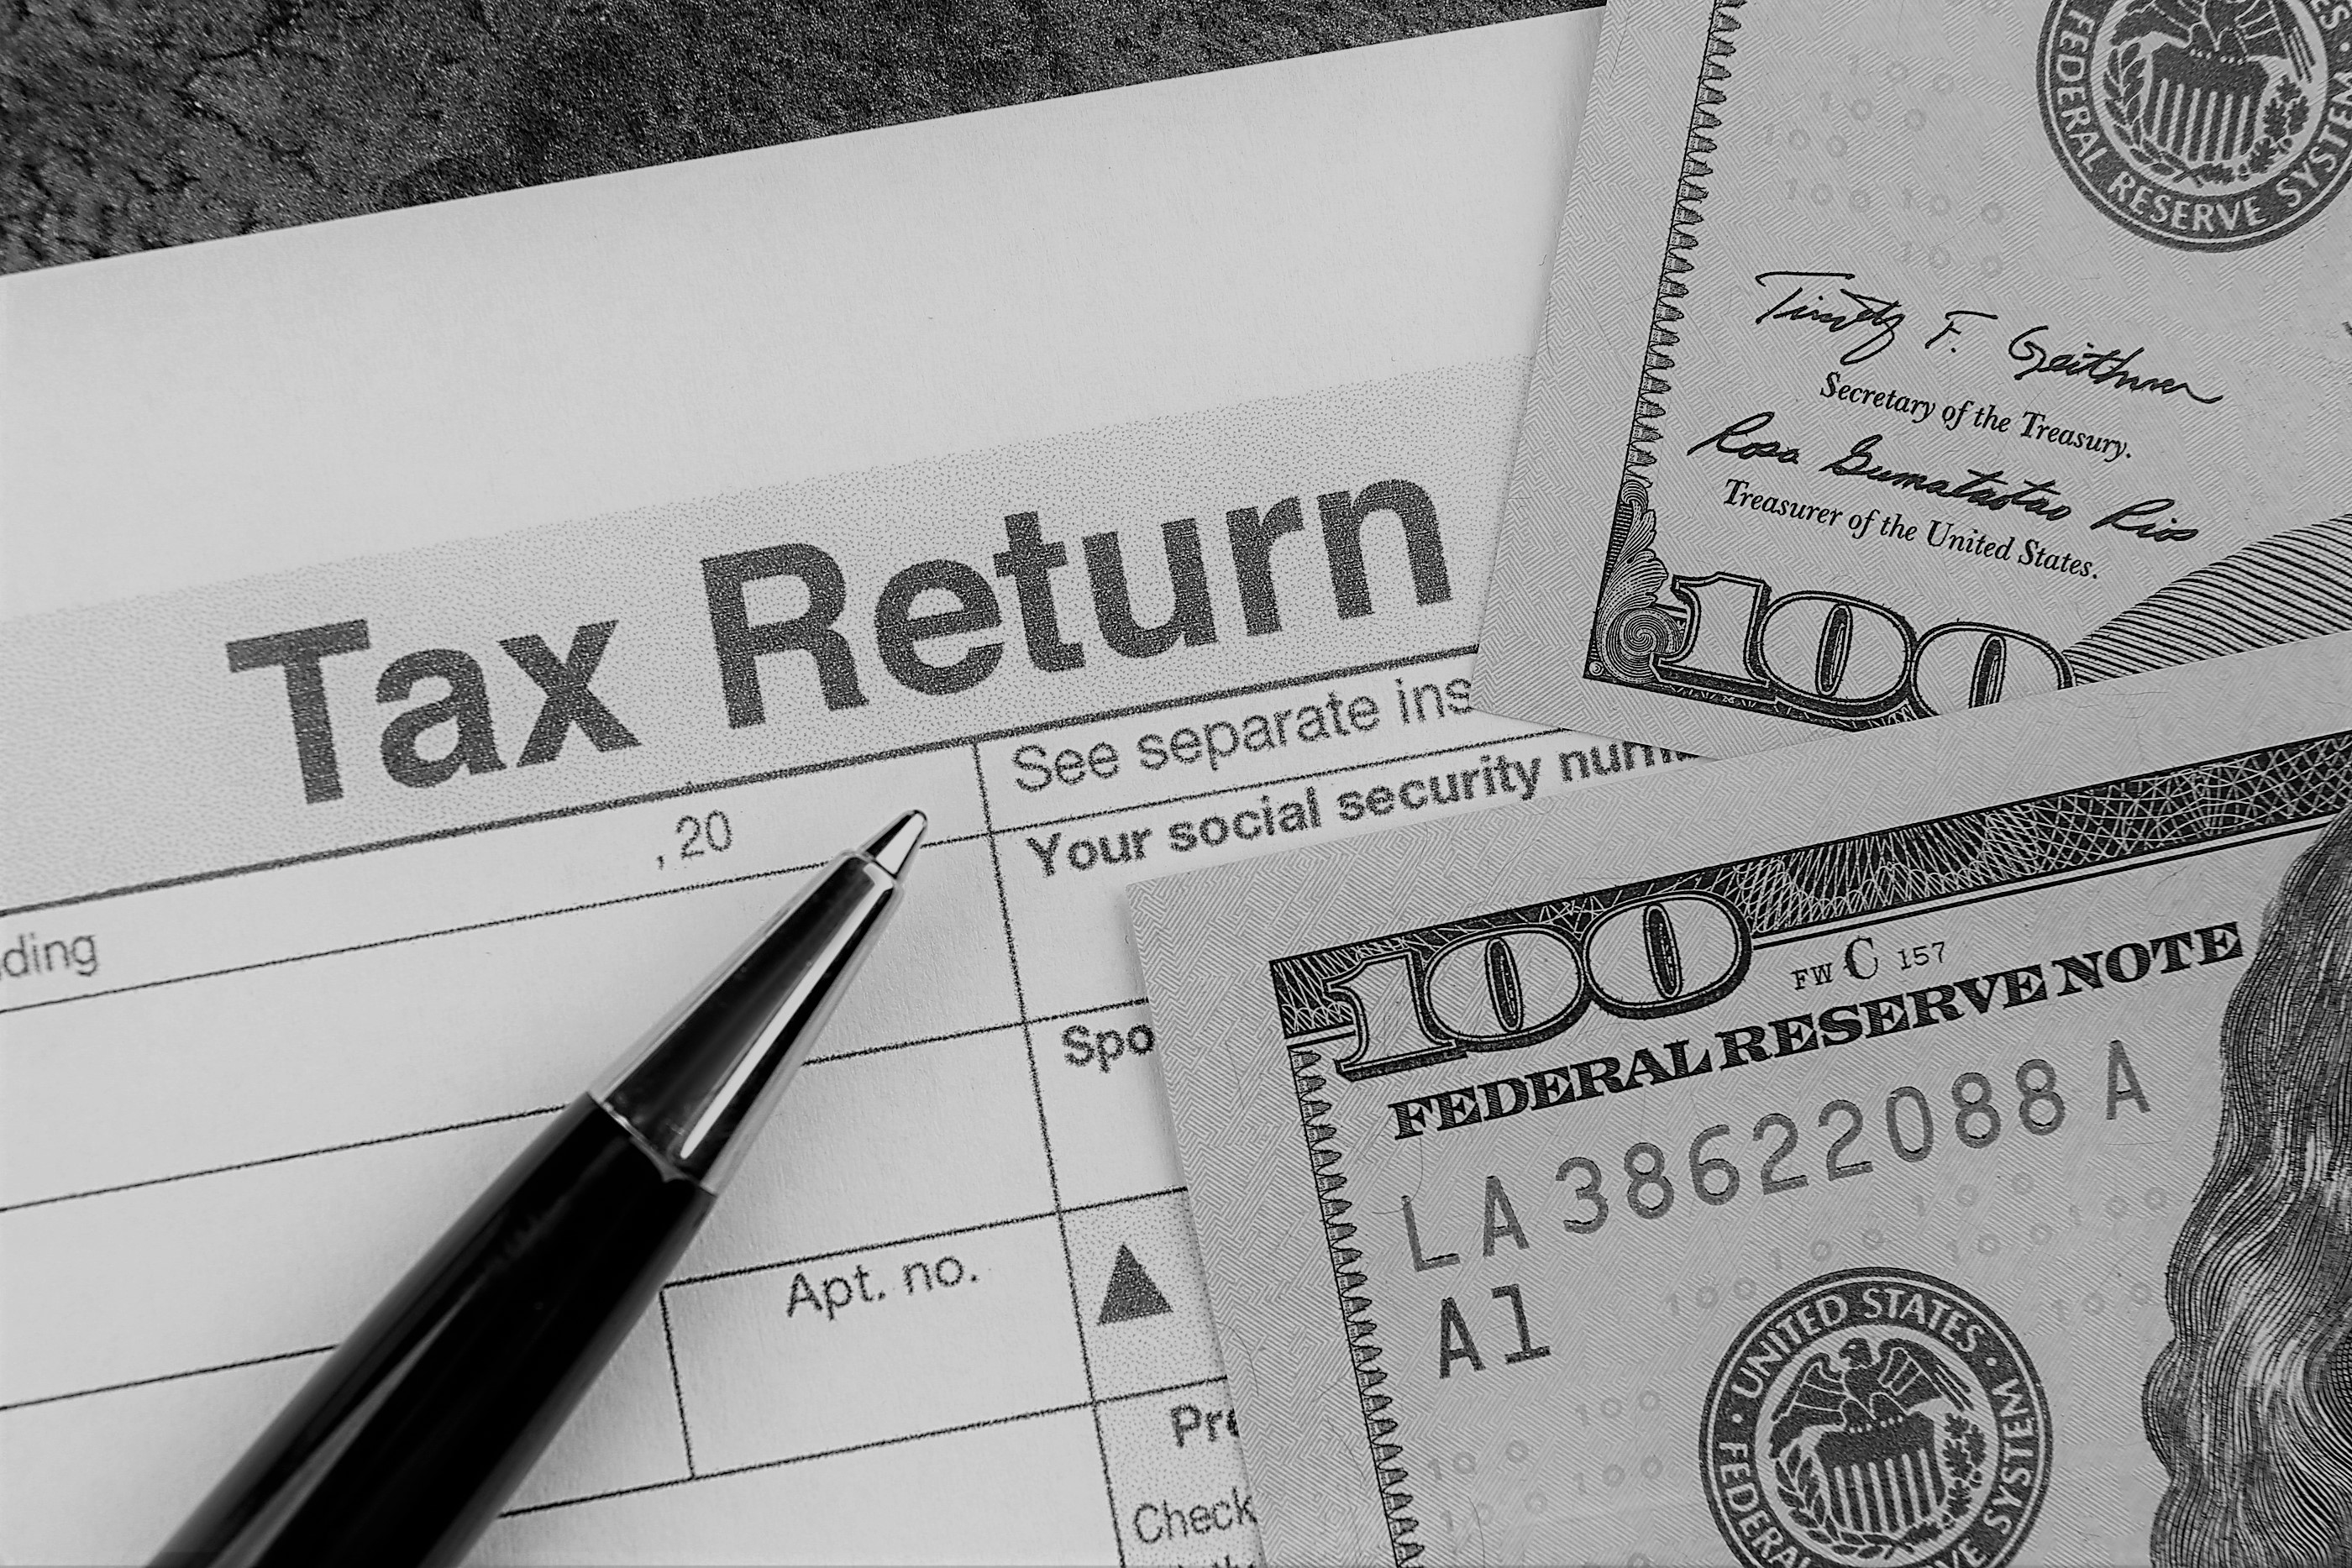 Image of a tax return form to identify IRS tax fraud REPORT TAX IRS IRS TAX FRAUD In the United States of America, federal tax evasion is defined as the purposeful, illegal attempt to evade the assessment or the payment of a tax imposed by federal law. Conviction of IRS tax fraud evasion may result in fines and imprisonment. The law provides for two types of whistleblower rewards awards. If the taxes, penalties, interest and other amounts in dispute exceed $2 million, and a few other qualifications are met, the IRS will pay 15-30% percent to 30 percent of the amount collected. If the case deals with an individual, his or her annual gross income must be more than $200,000. If the whistleblower disagrees with the outcome of the claim, he or she can appeal to the Tax Court. These rules are found at Internal Revenue Code IRC Section 7623(b) – Whistleblower Rules. The IRS also has an award program for other tax whistleblowers – generally those who do not meet the dollar thresholds of $2 million in dispute or cases involving individual taxpayers with gross income of less than $200,000. The IRS whistleblower rewards awards through this program are less, with a maximum reward award of 15% percent up to $10 million.